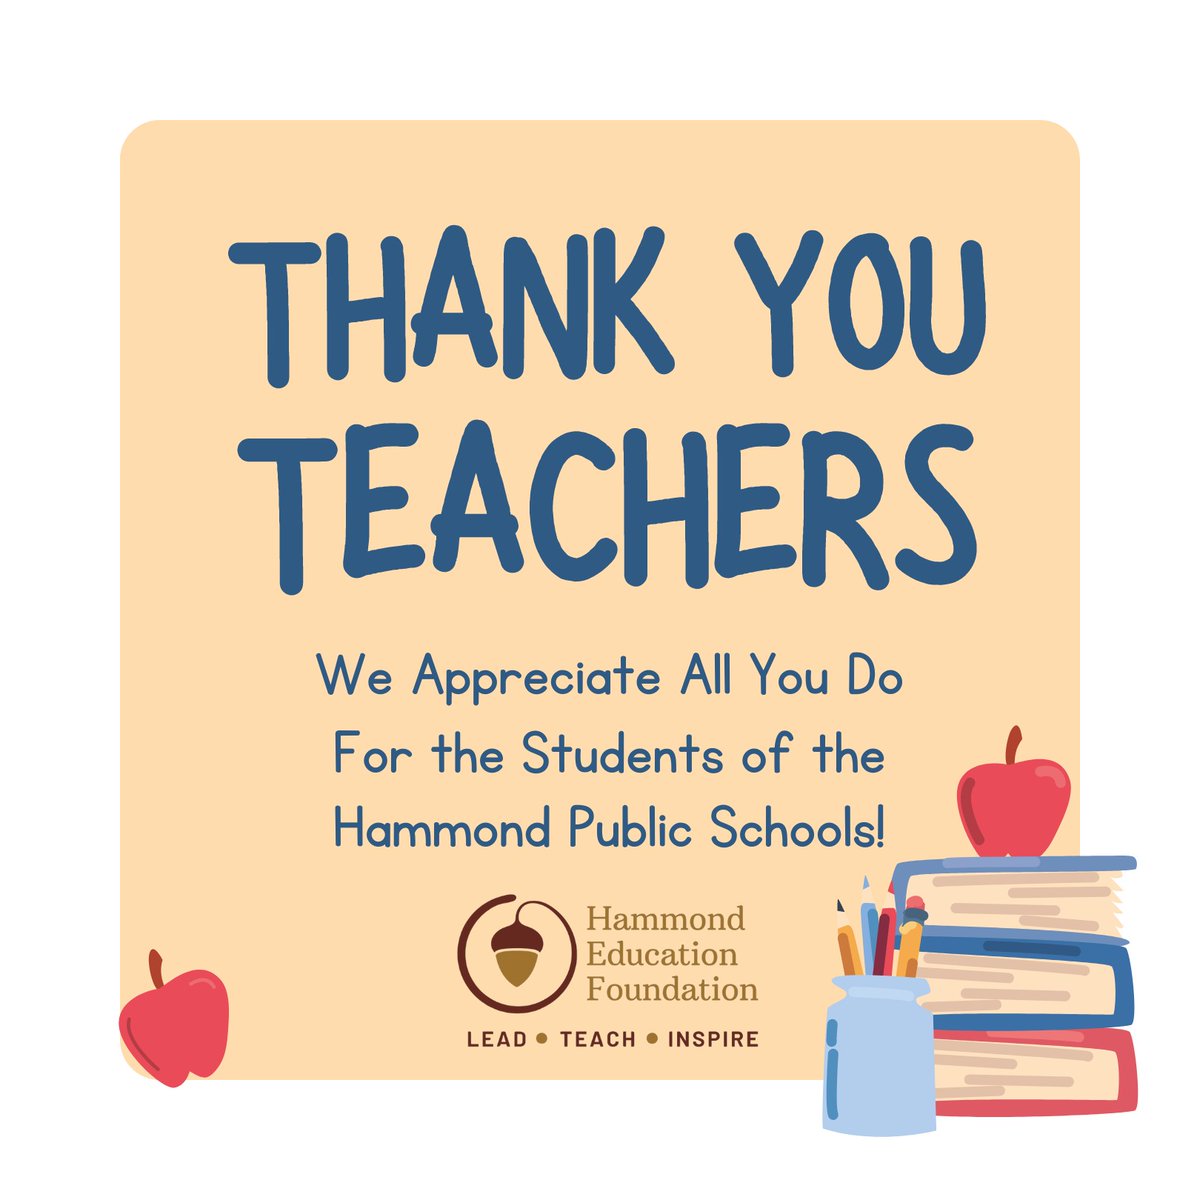 Join us in thanking our teachers for all they do for our students within the School City of Hammond!